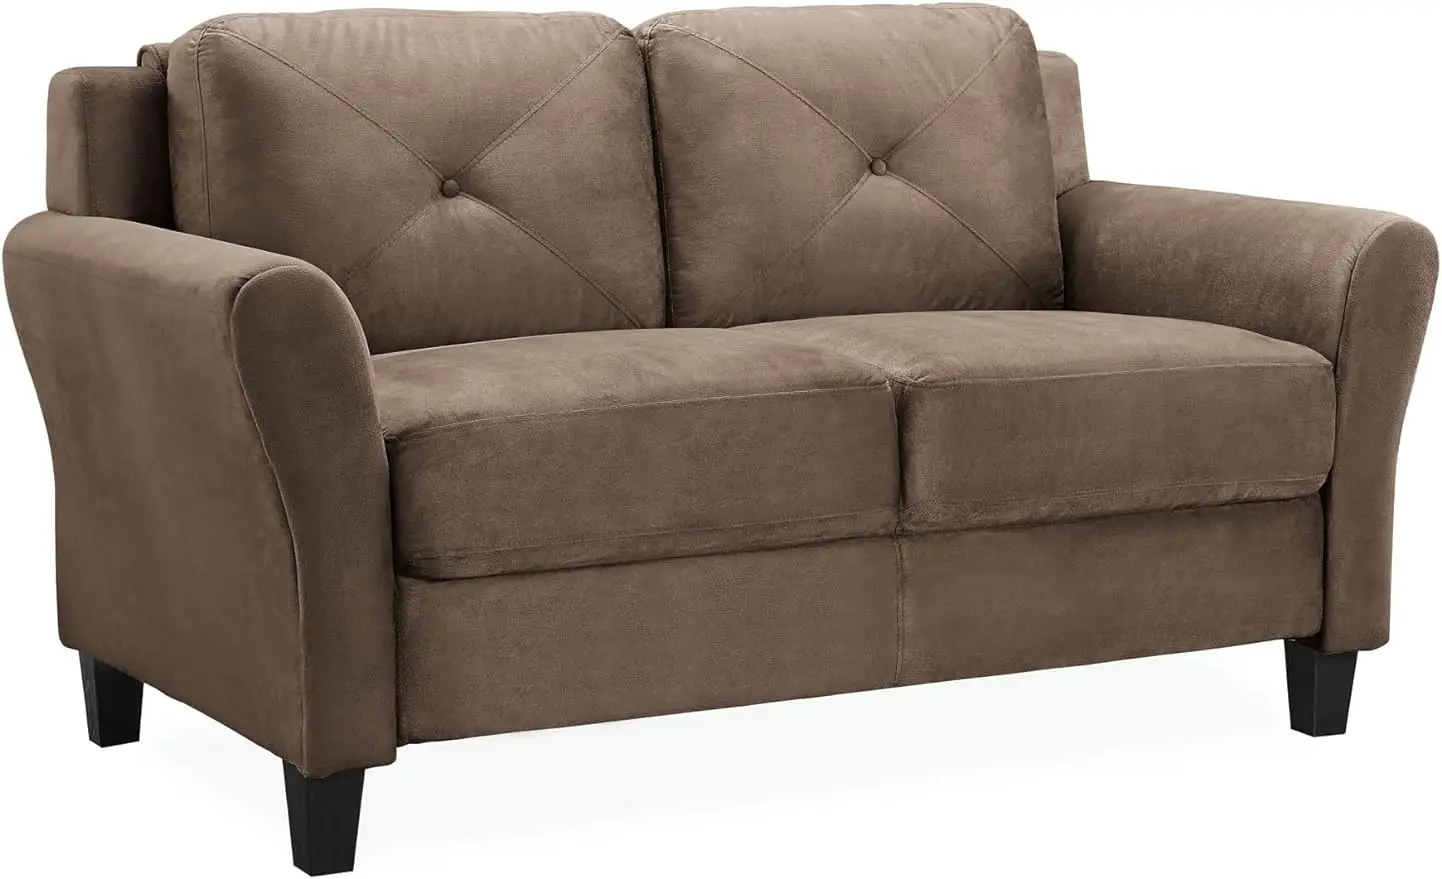 

Lifestyle Solutions Loveseat Love Seats, 57.9" W x 31.5" D x 32.7" H, Brown